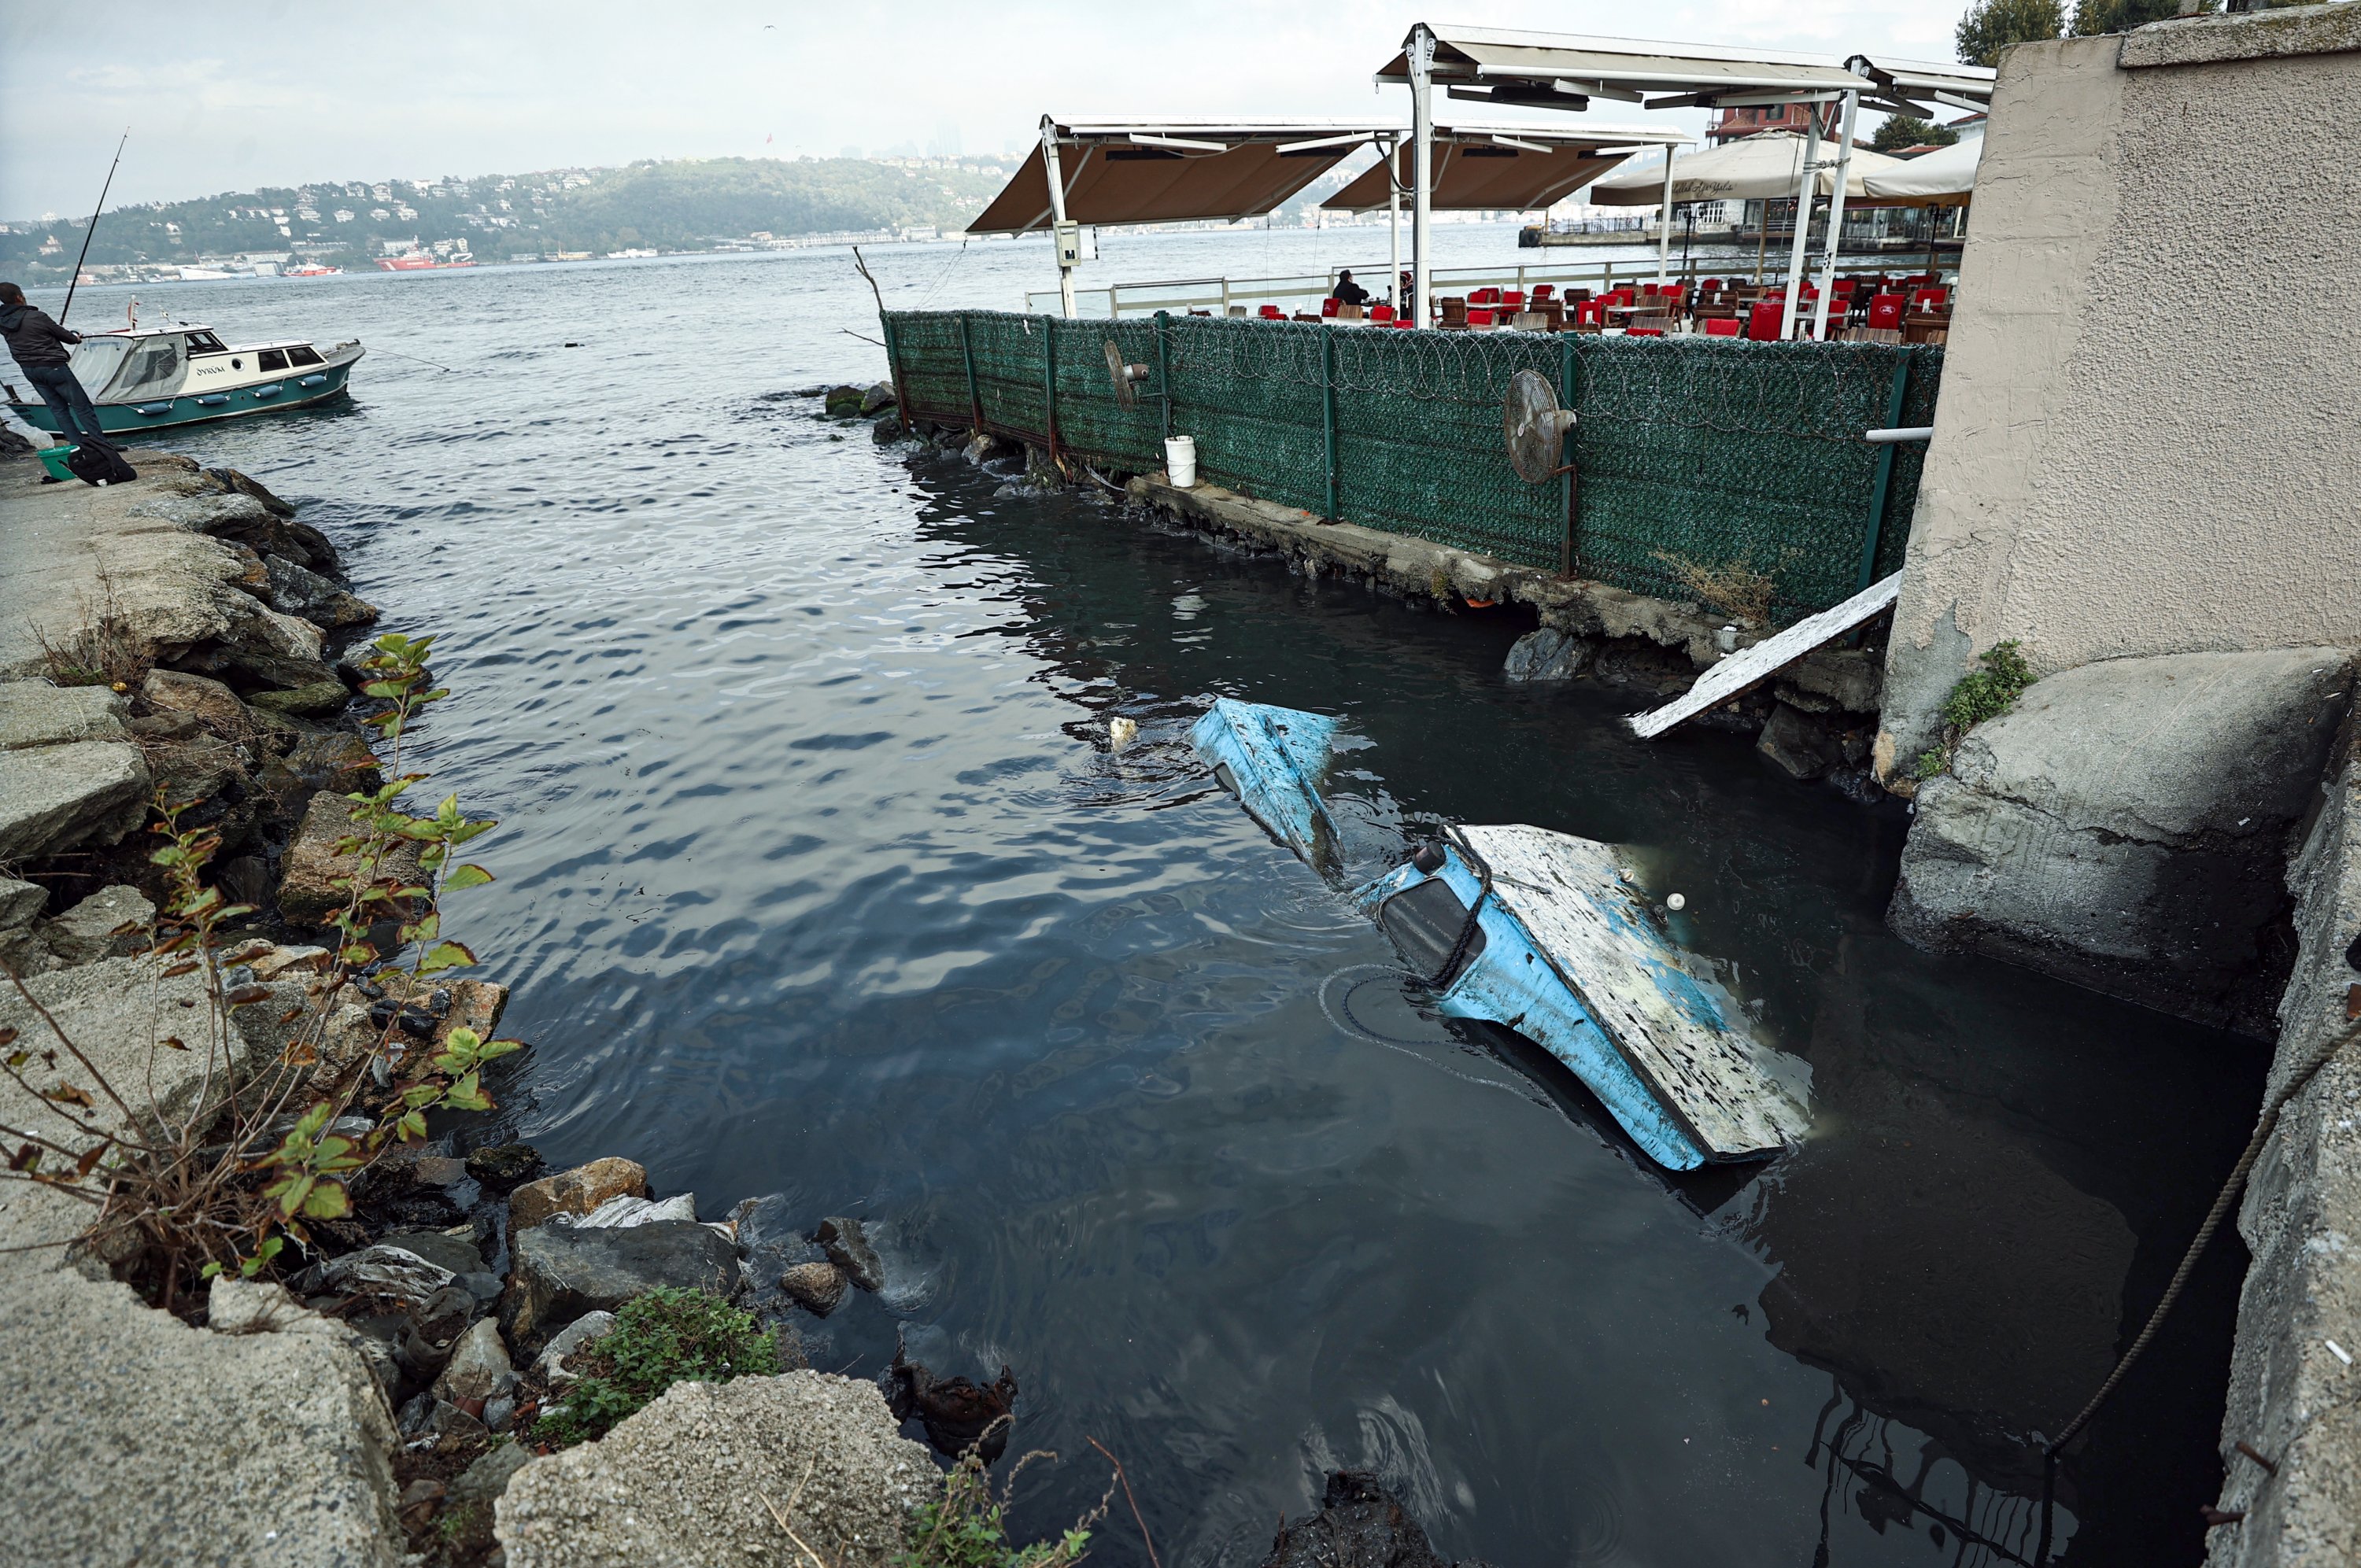 A business is seen to have installed fans to keep the bad smell away near the mouth of the Bekar Stream emptying into the Bosporus, in Çengelköy, Üsküdar district, Istanbul, Oct. 18, 2021. (AA Photo)